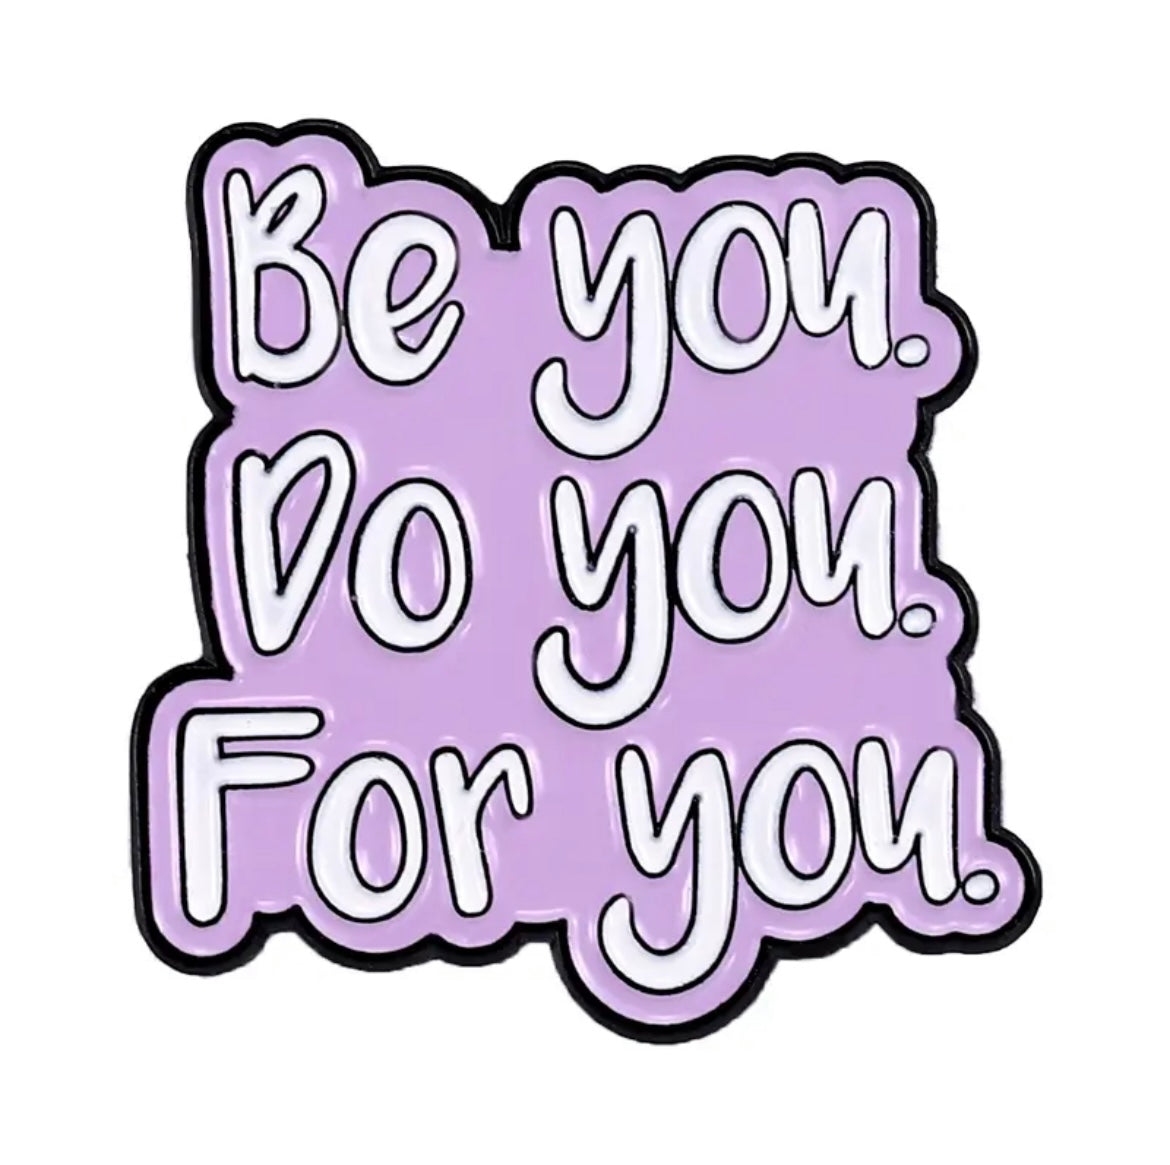 Pin — ‘Be You. Do You. For You’